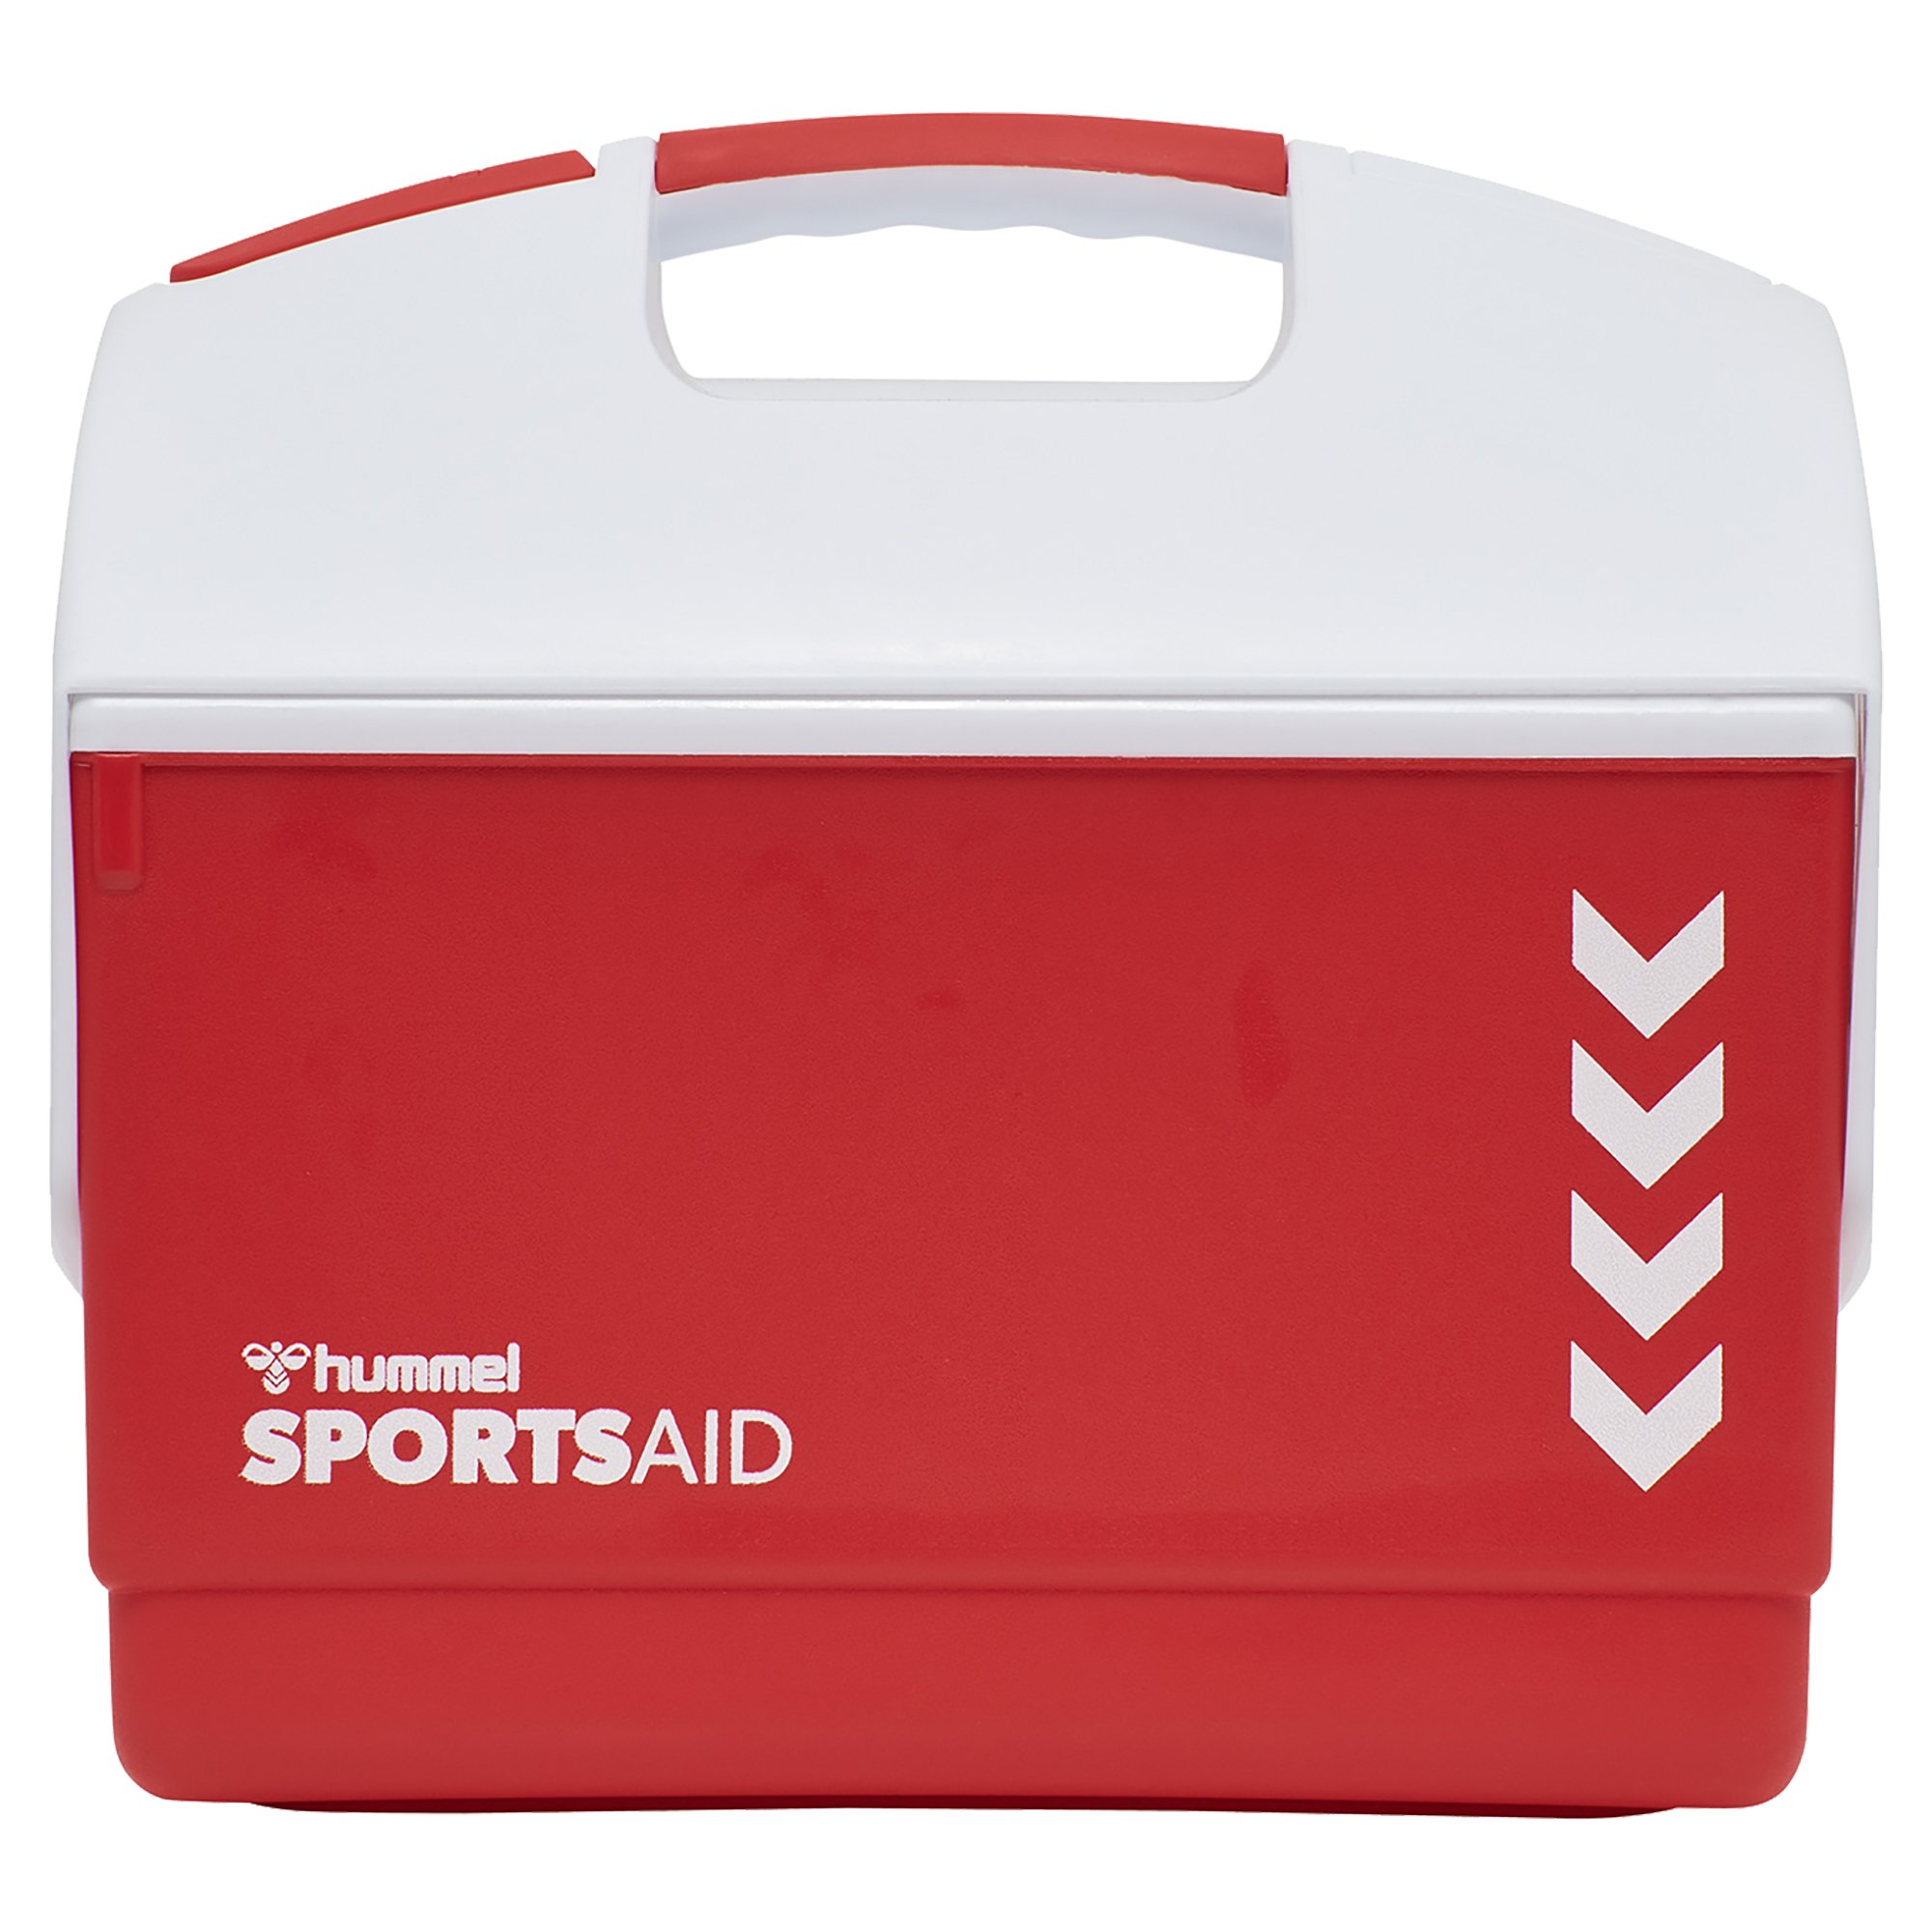 Sportsaid Cooling Box